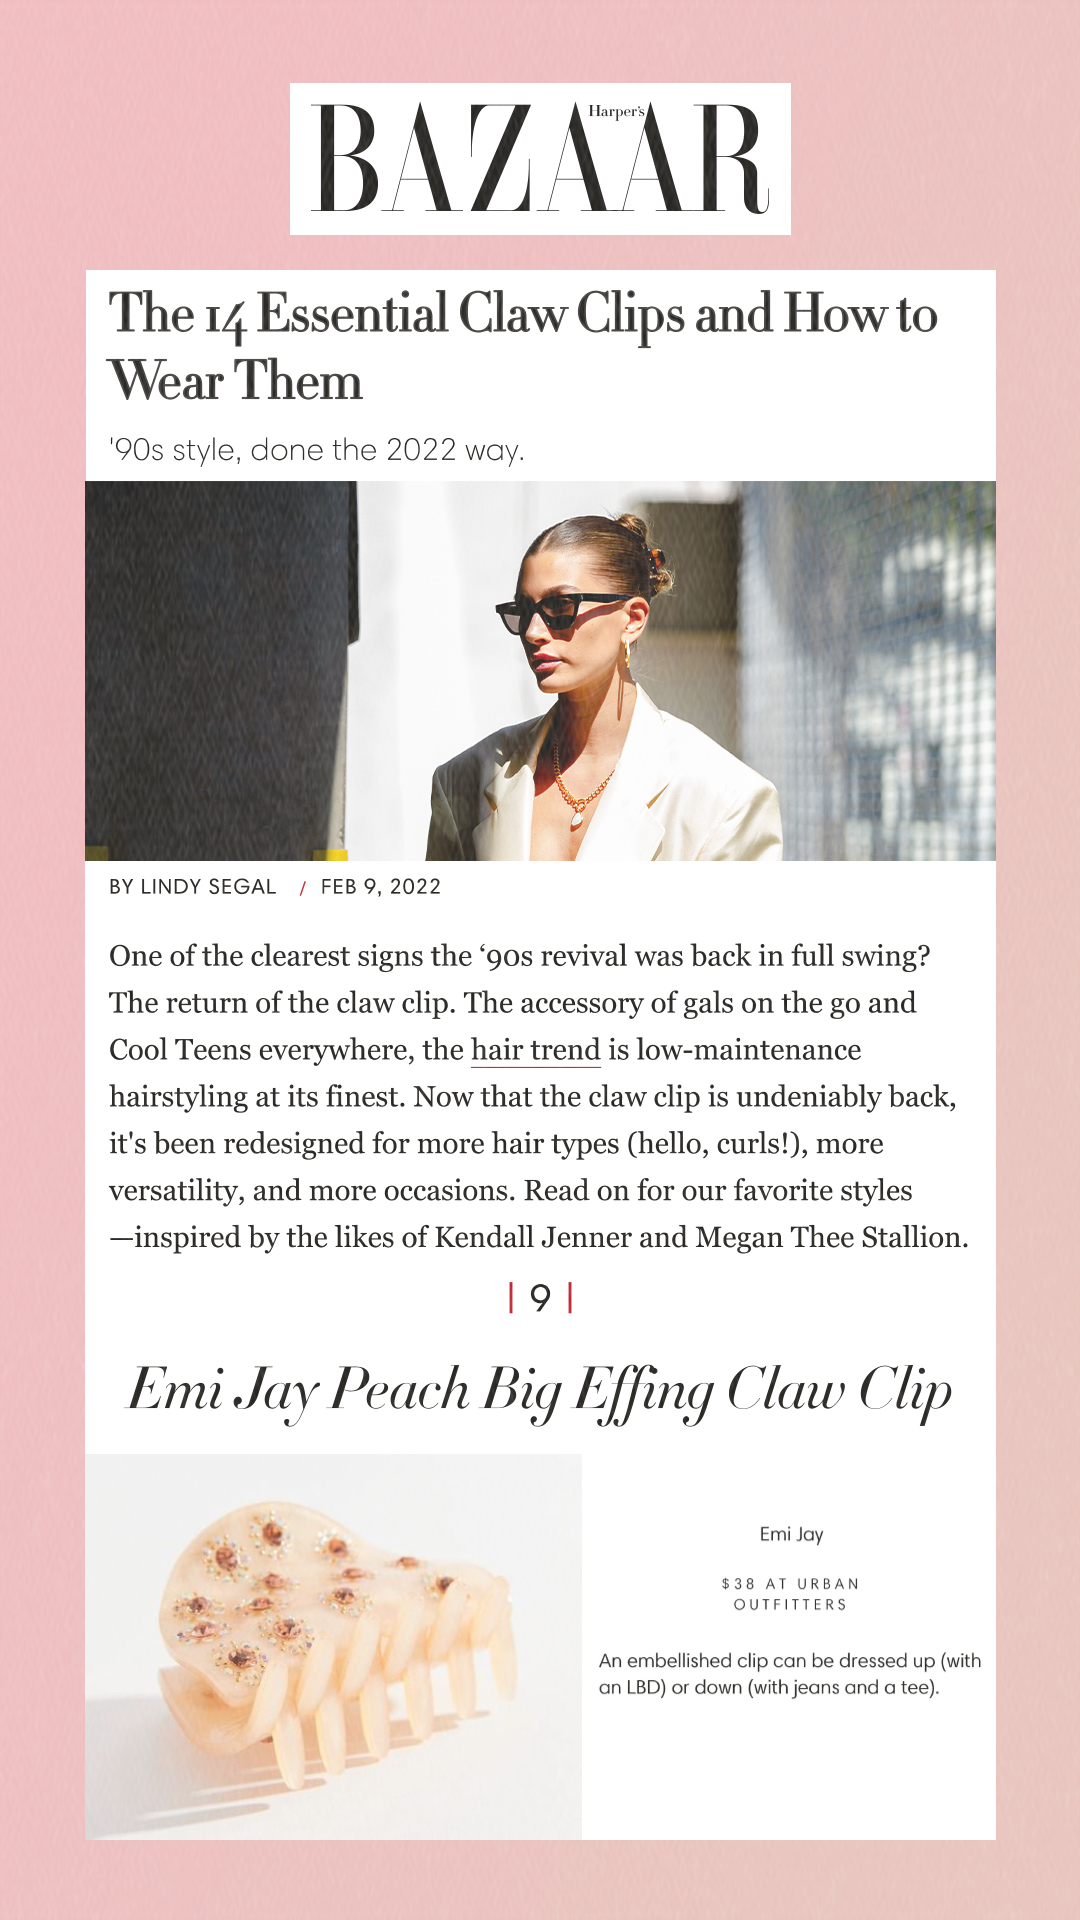 Harper's Bazaar. The 14 Essential Claw Clips and How to Wear Them '90s style, done the 2022 way. One of the clearest signs the ‘90s revival was back in full swing? The return of the claw clip. The accessory of gals on the go and Cool Teens everywhere, the hair trend is low-maintenance hairstyling at its finest. Now that the claw clip is undeniably back, it's been redesigned for more hair types (hello, curls!), more versatility, and more occasions. Read on for our favorite styles—inspired by the likes of Kendall Jenner and Megan Thee Stallion. Emi Jay Peach Big Effing Claw Clip An embellished clip can be dressed up (with an LBD) or down (with jeans and a tee).